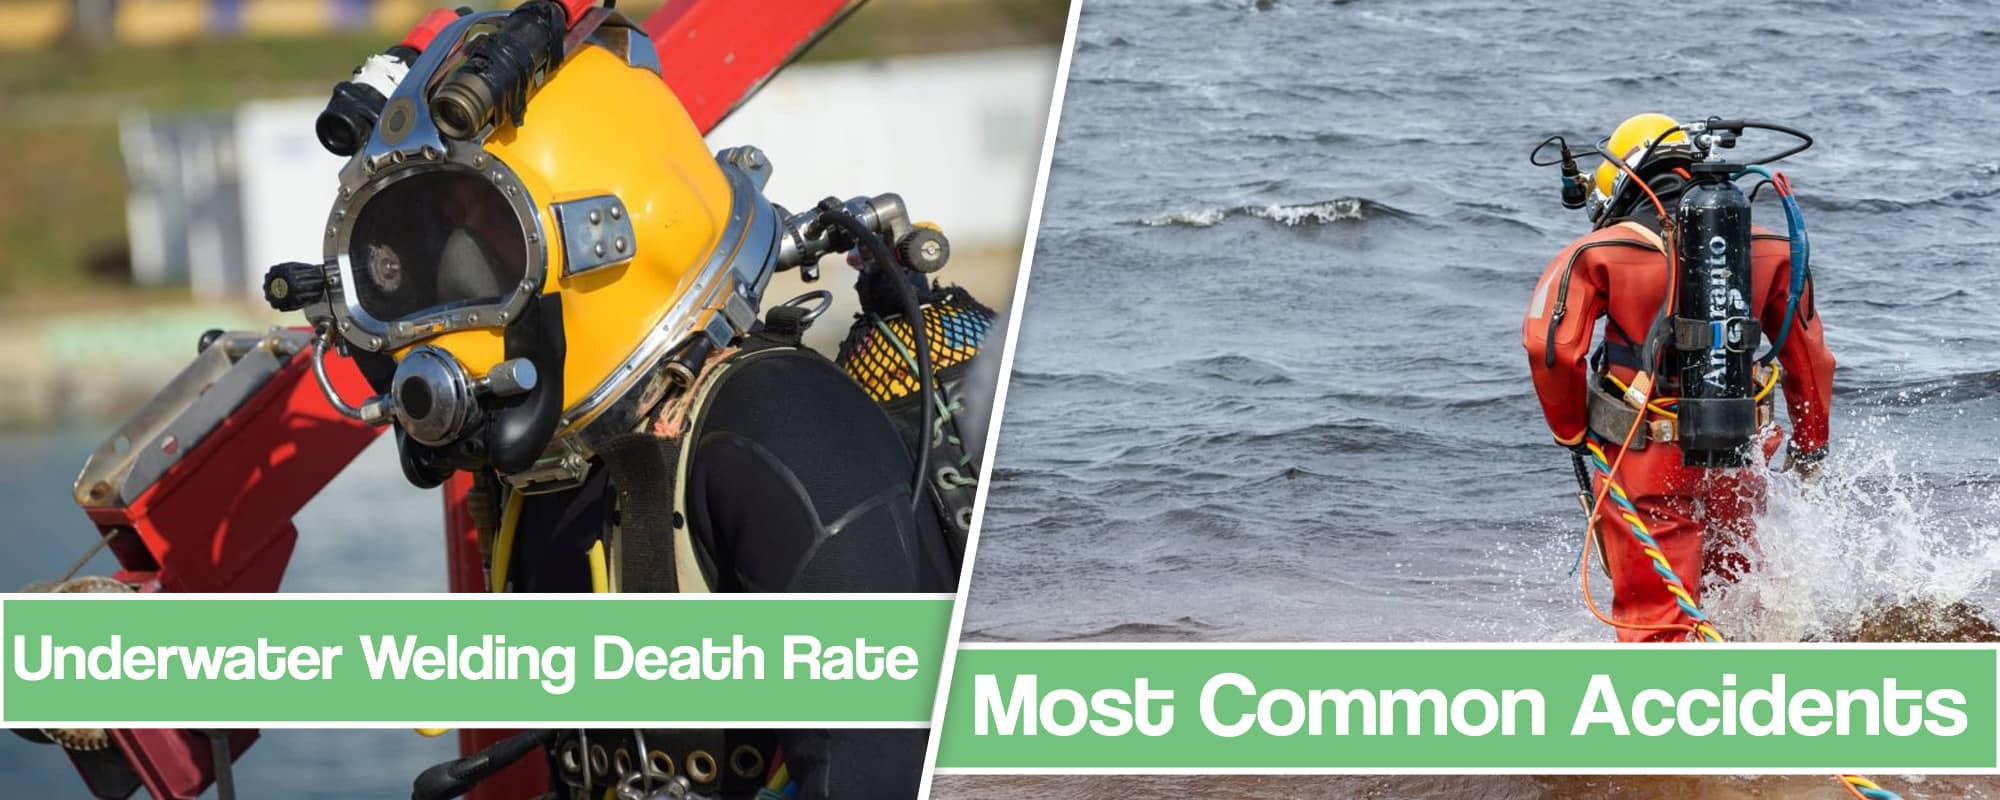 Feature Image for Underwater Welding Death Rate article